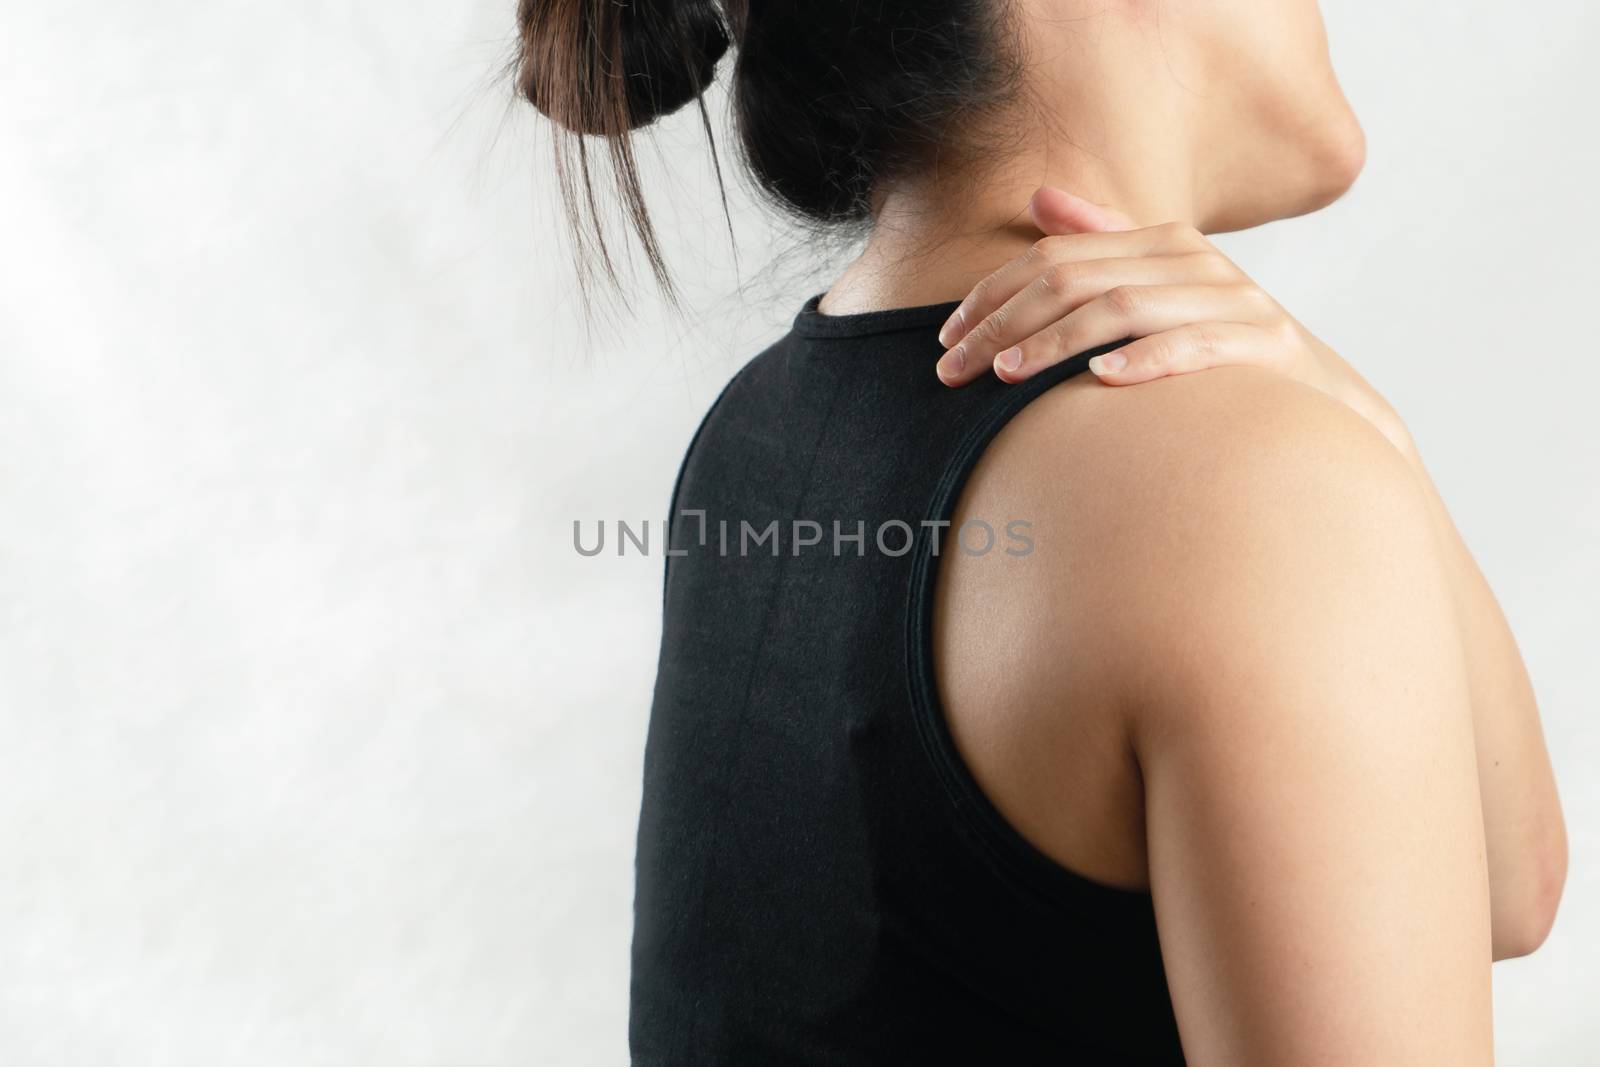 young women neck and shoulder pain injury, healthcare and medical concept